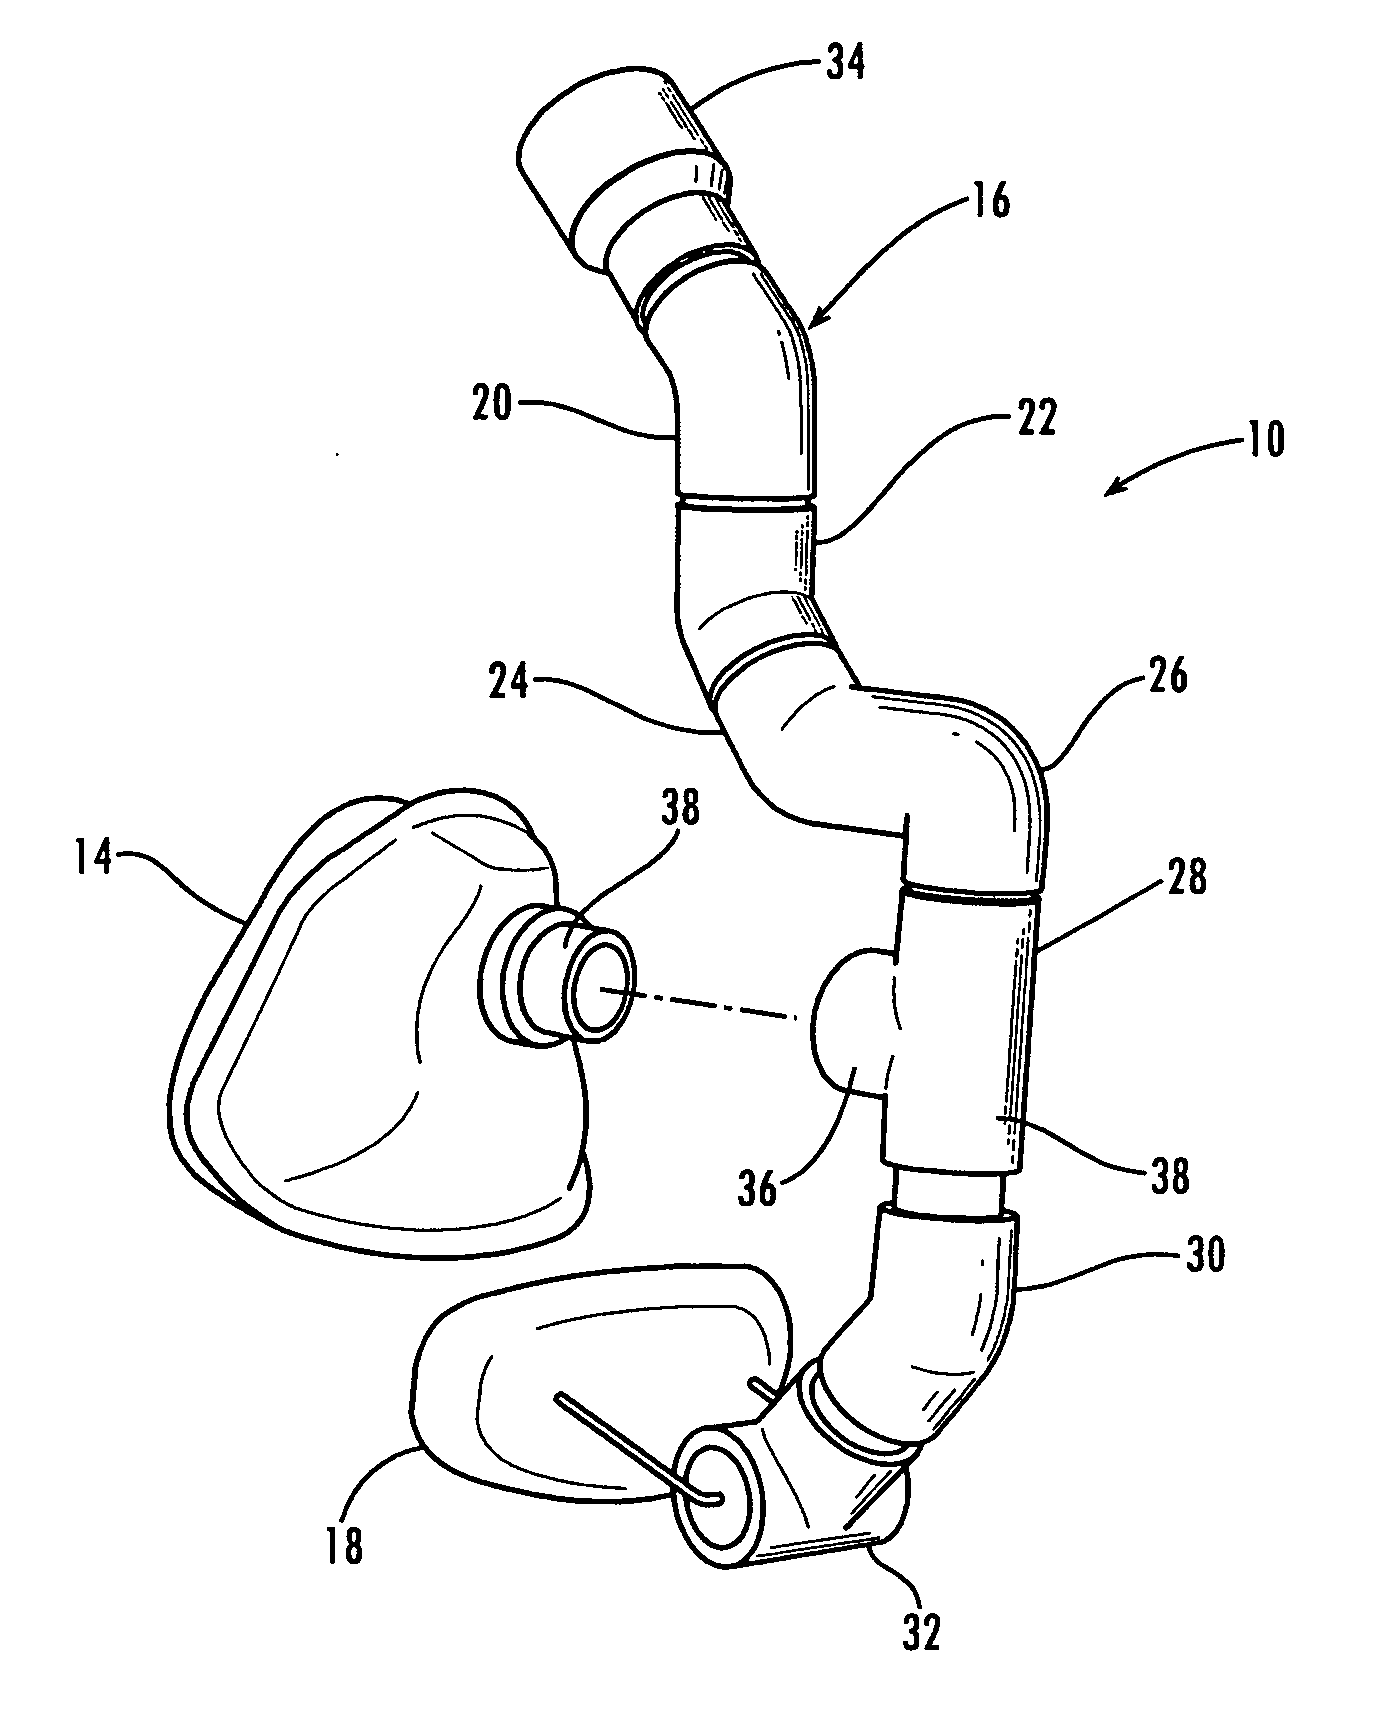 Assisted breathing device and method of wearing same